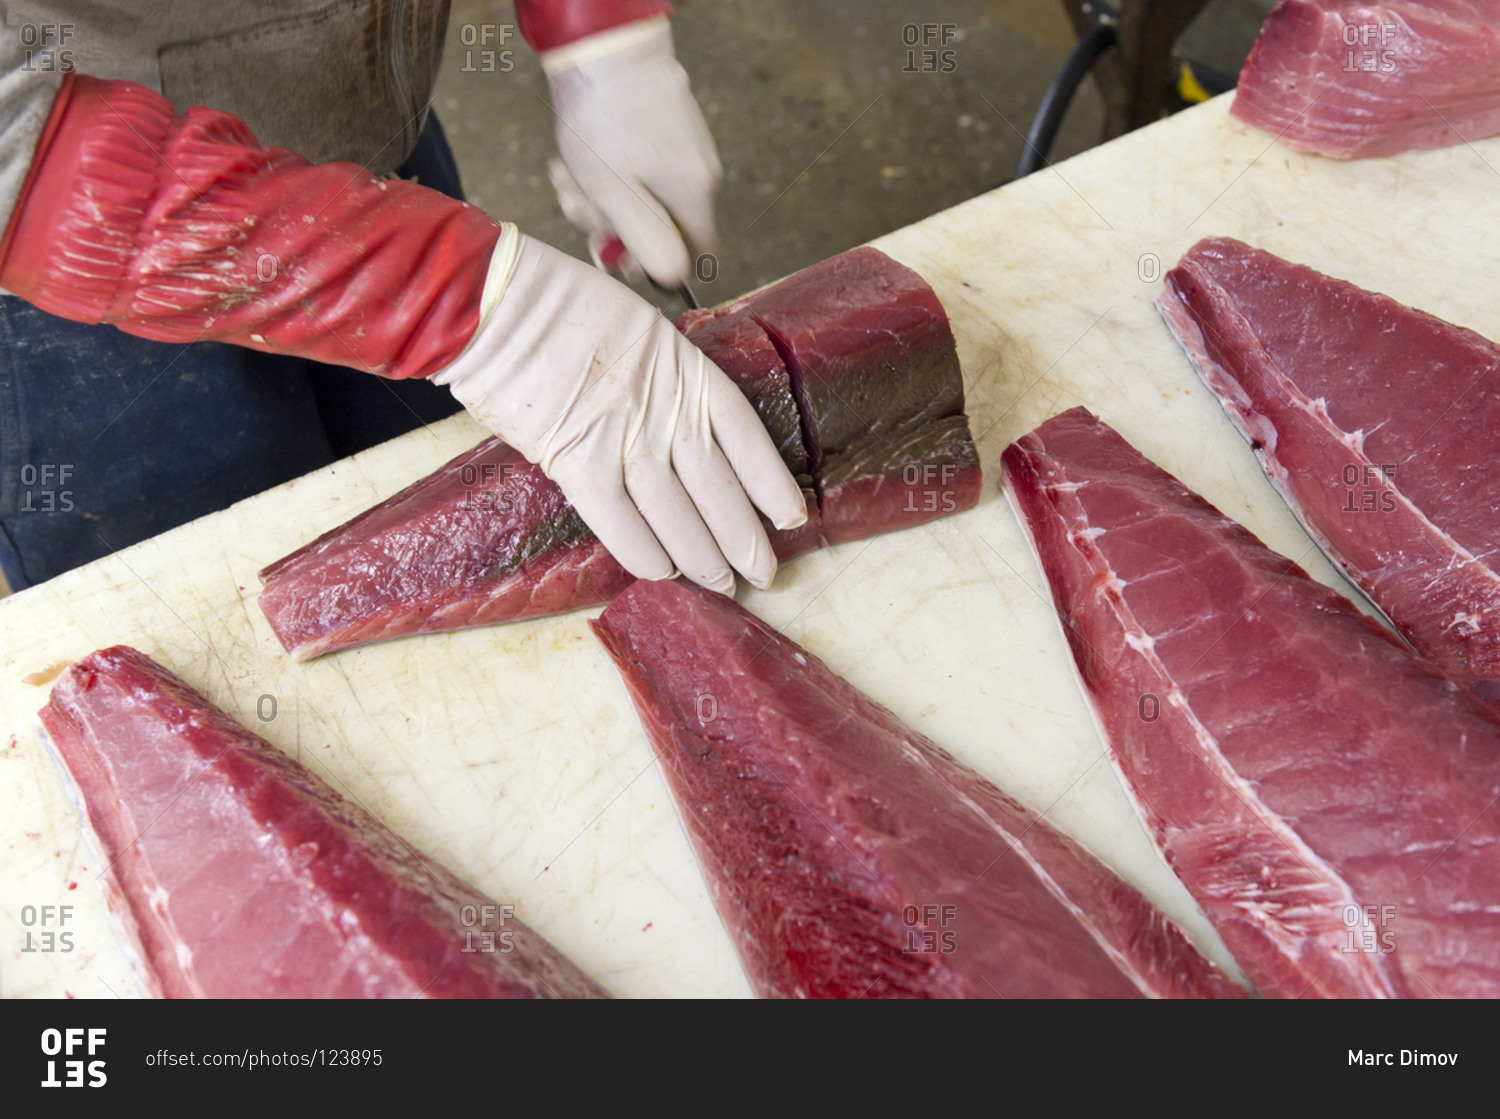 Grade A tuna being prepared for delivery